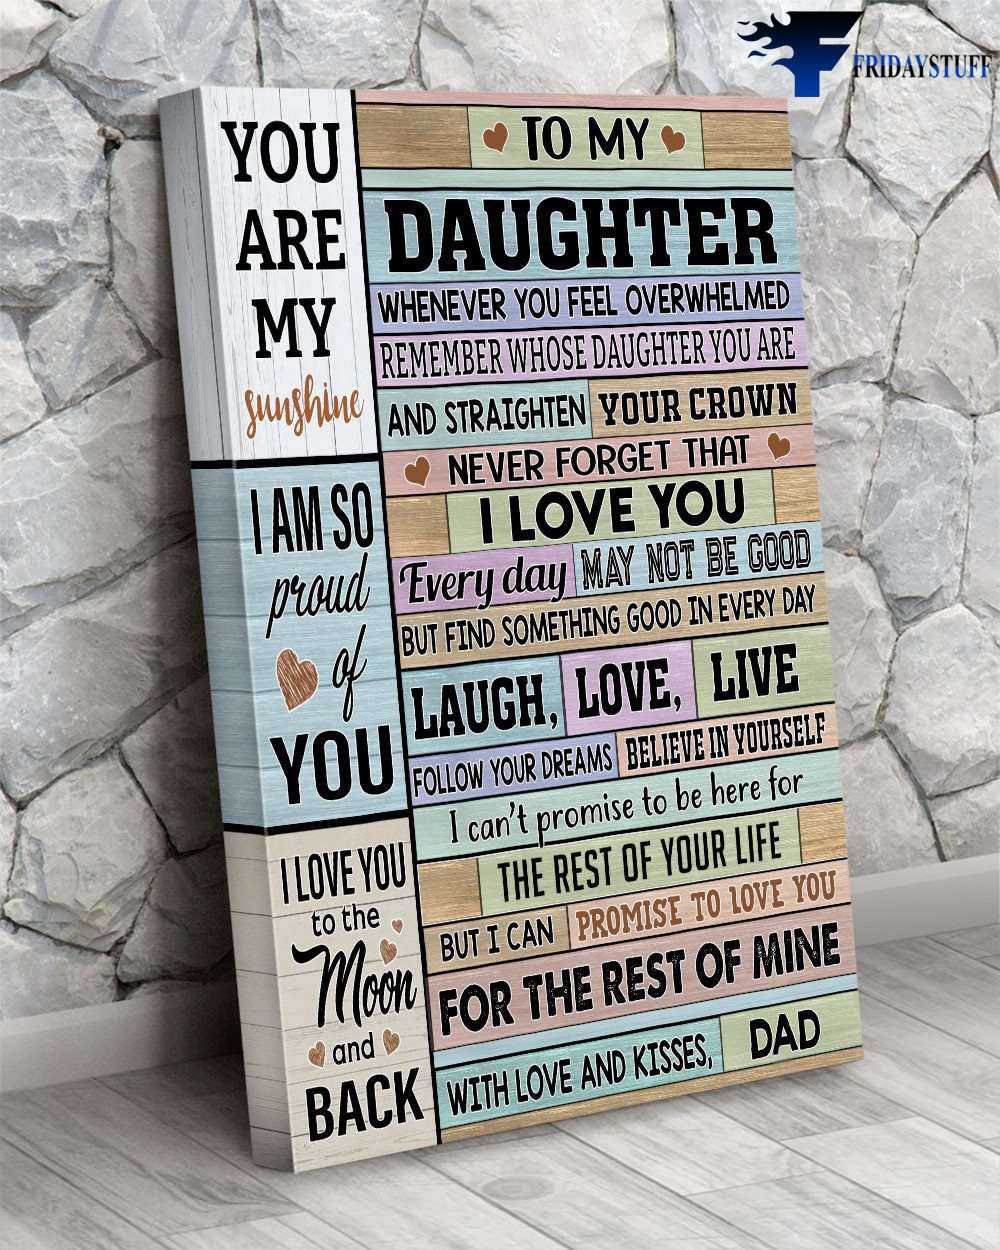 Dad And Daughter - To M Daughter, Whenever You Feel Overwhelmed, Remember Whose Daughter You Are, And Straighten, Your Crown, Never Forget That, I Love You, You Are My Sunshine